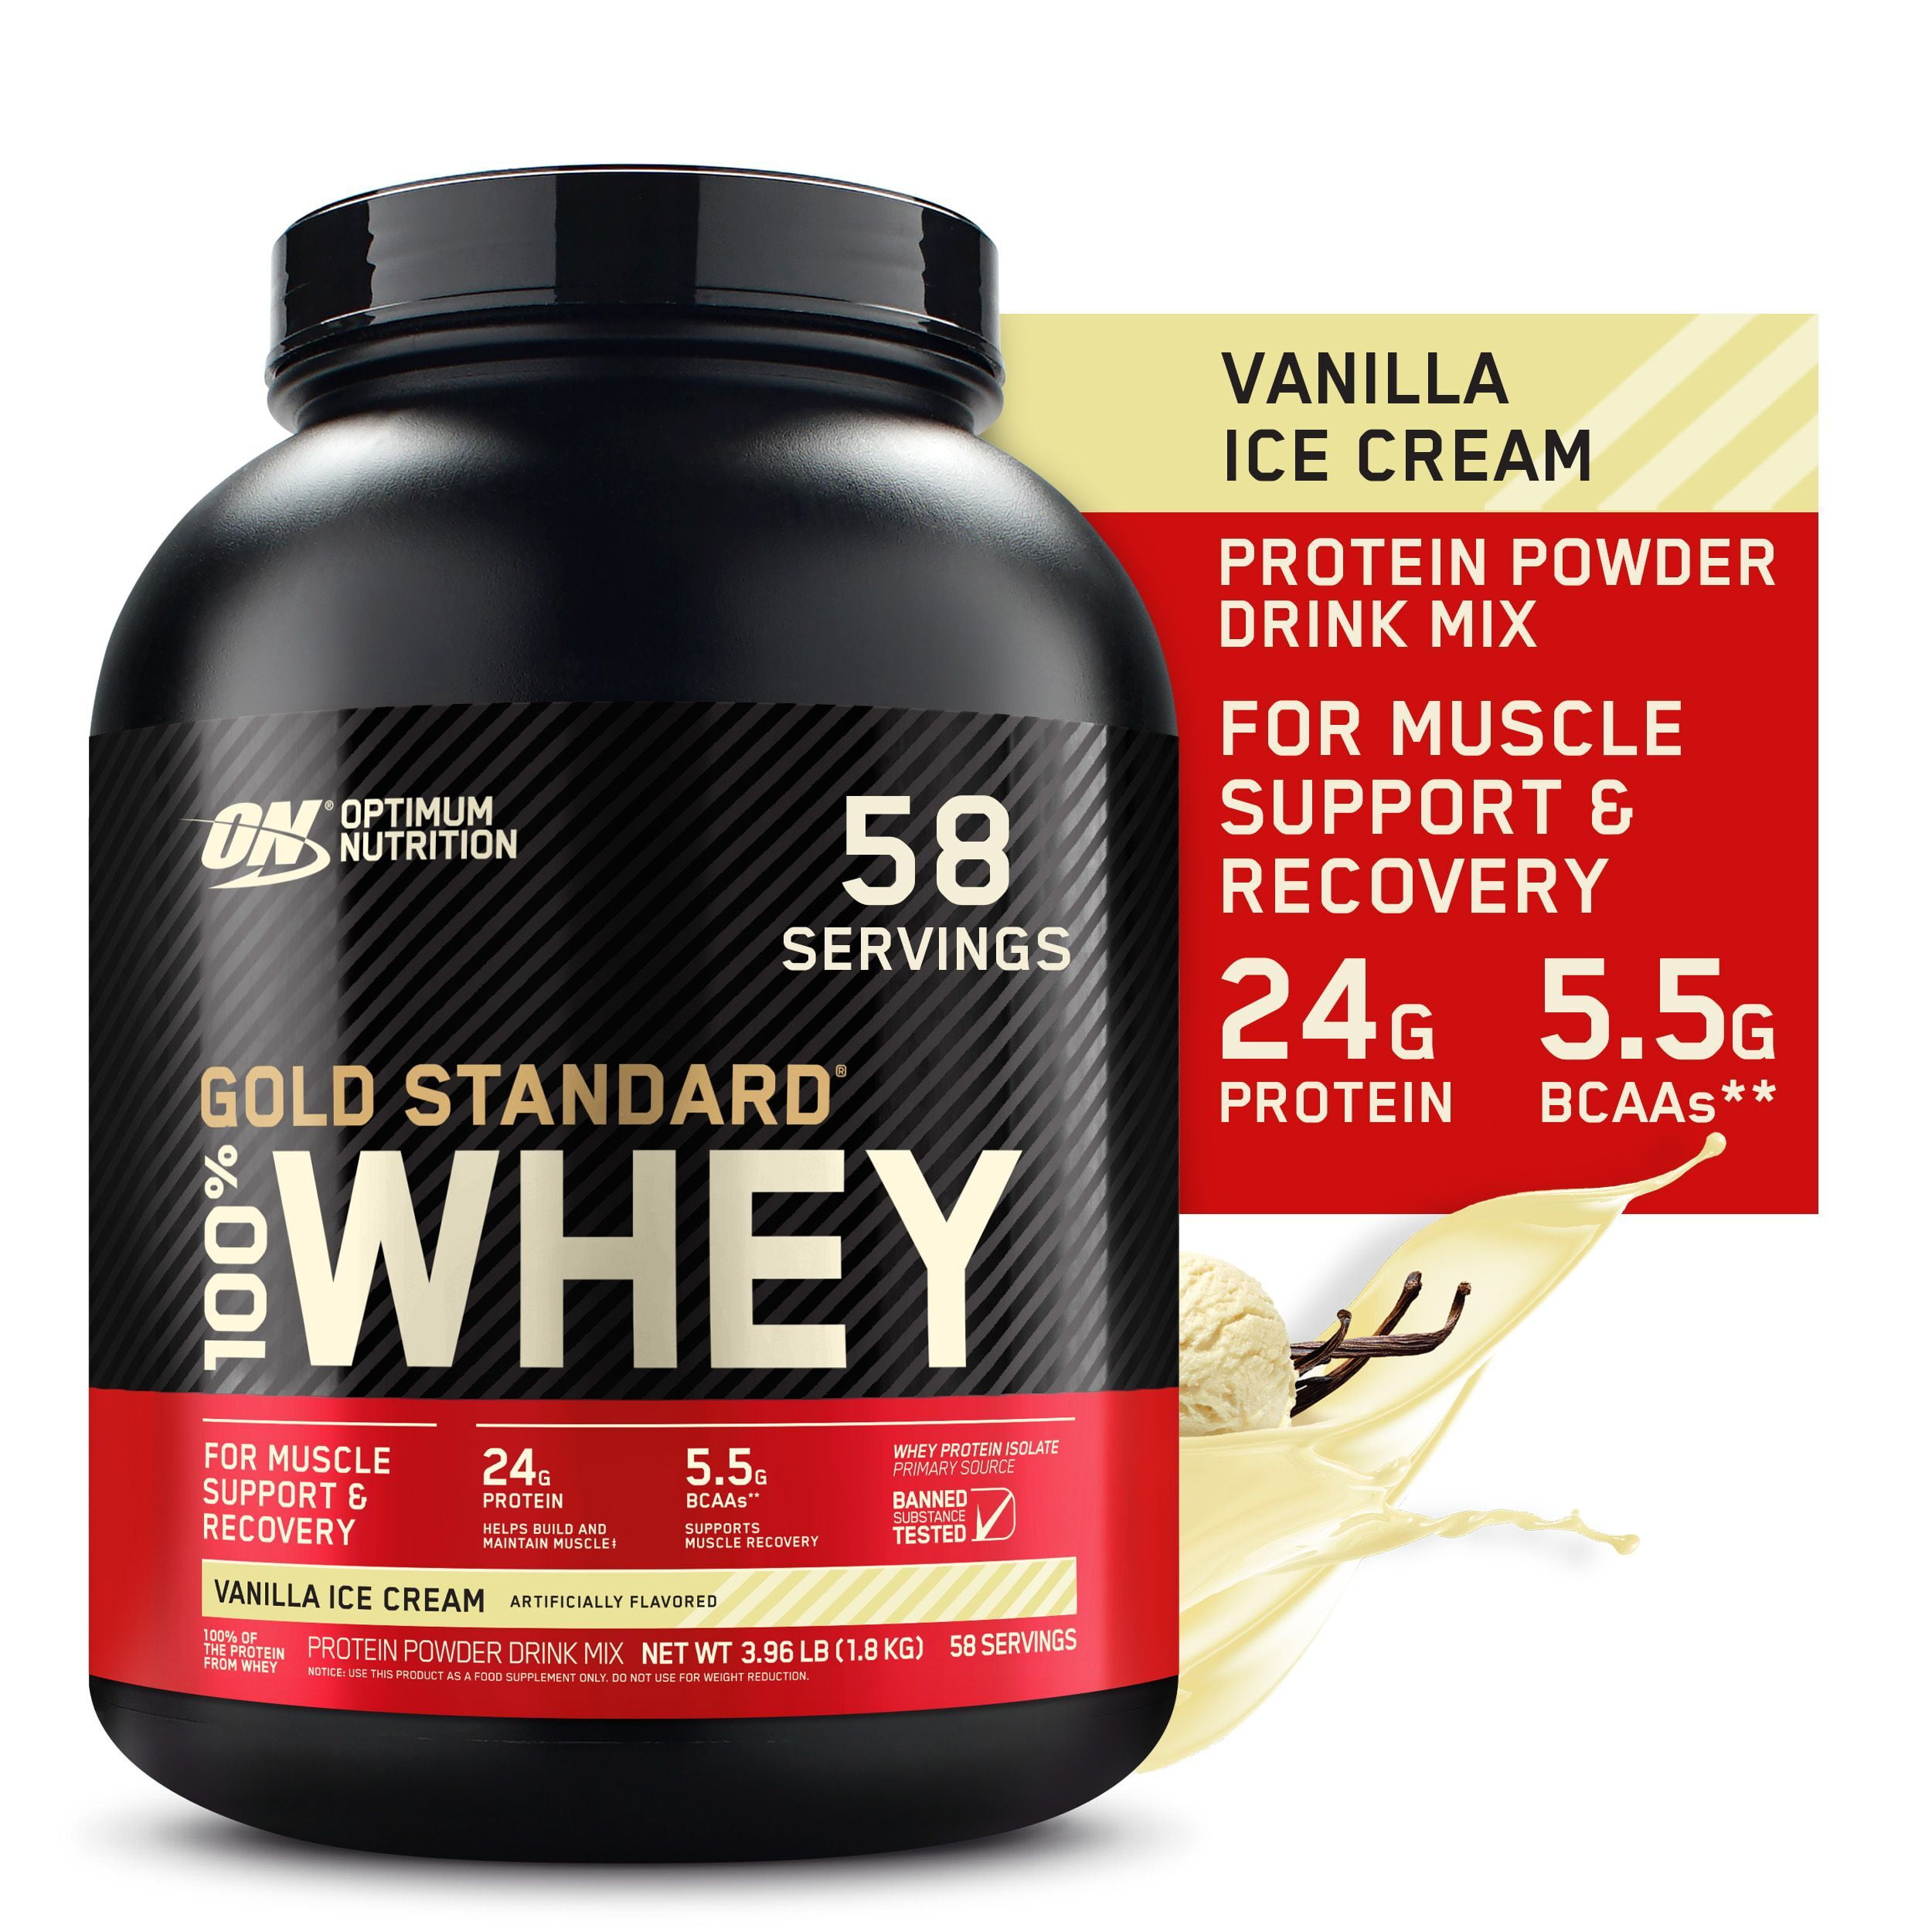 ISO 100 Whey Protein 4lb - Perfect Nutrition Store